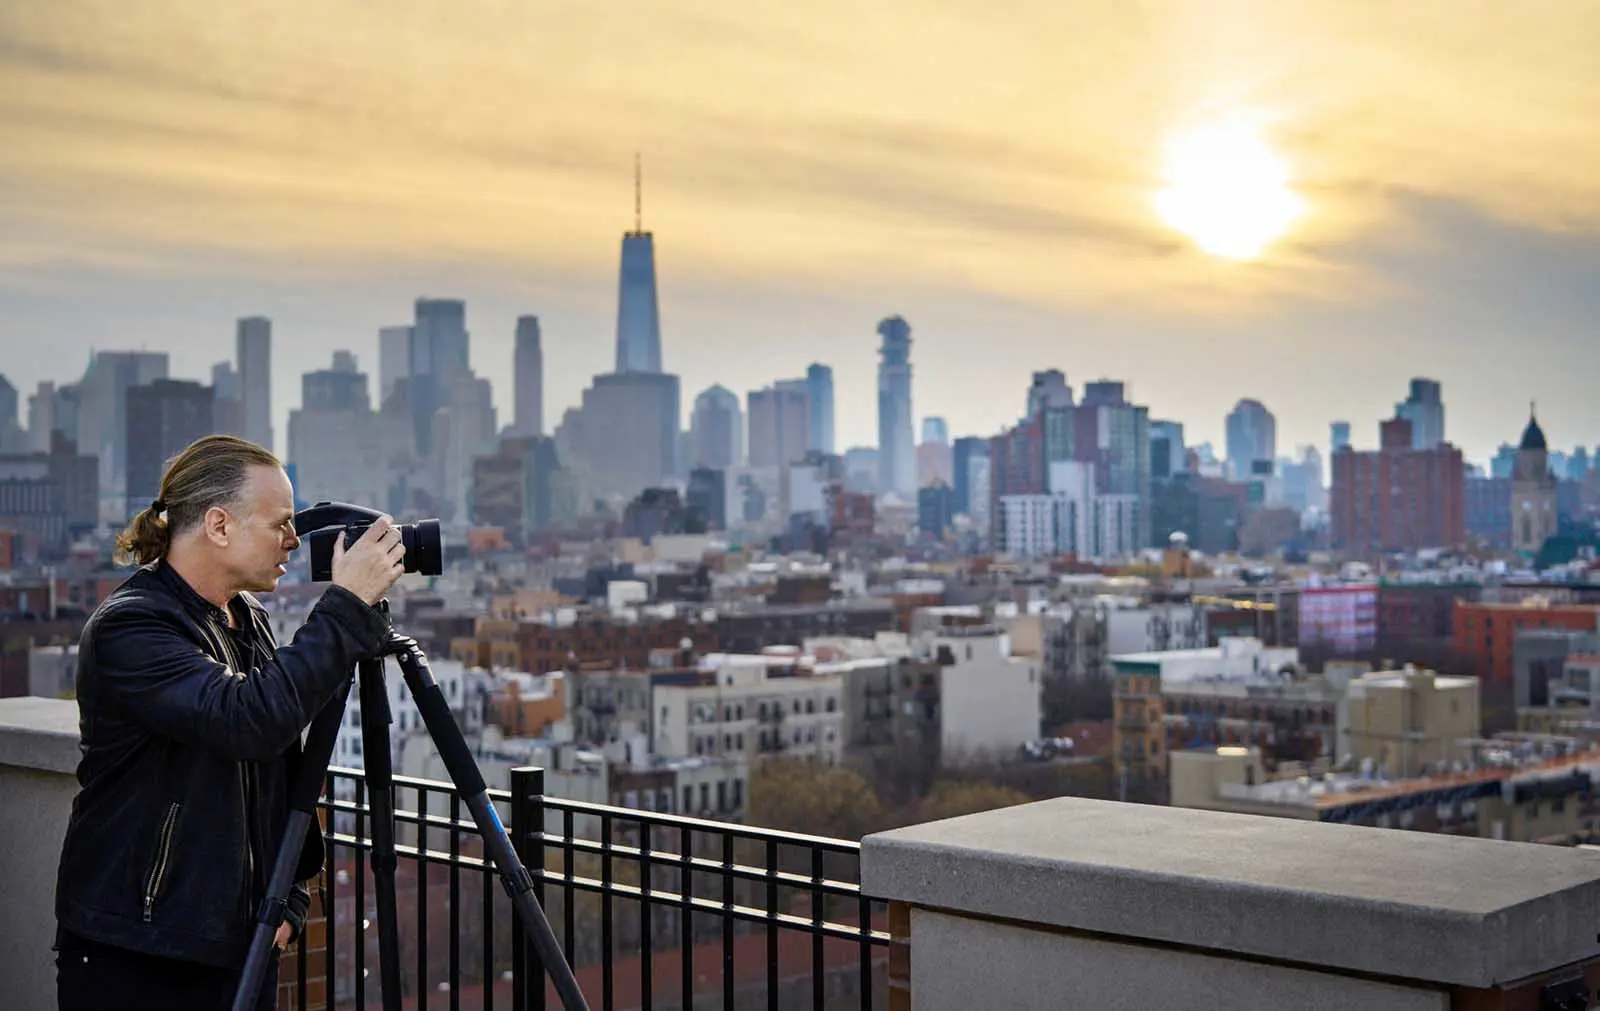 Karsten Staiger photographing the New York skyline with his camera in a tripod.